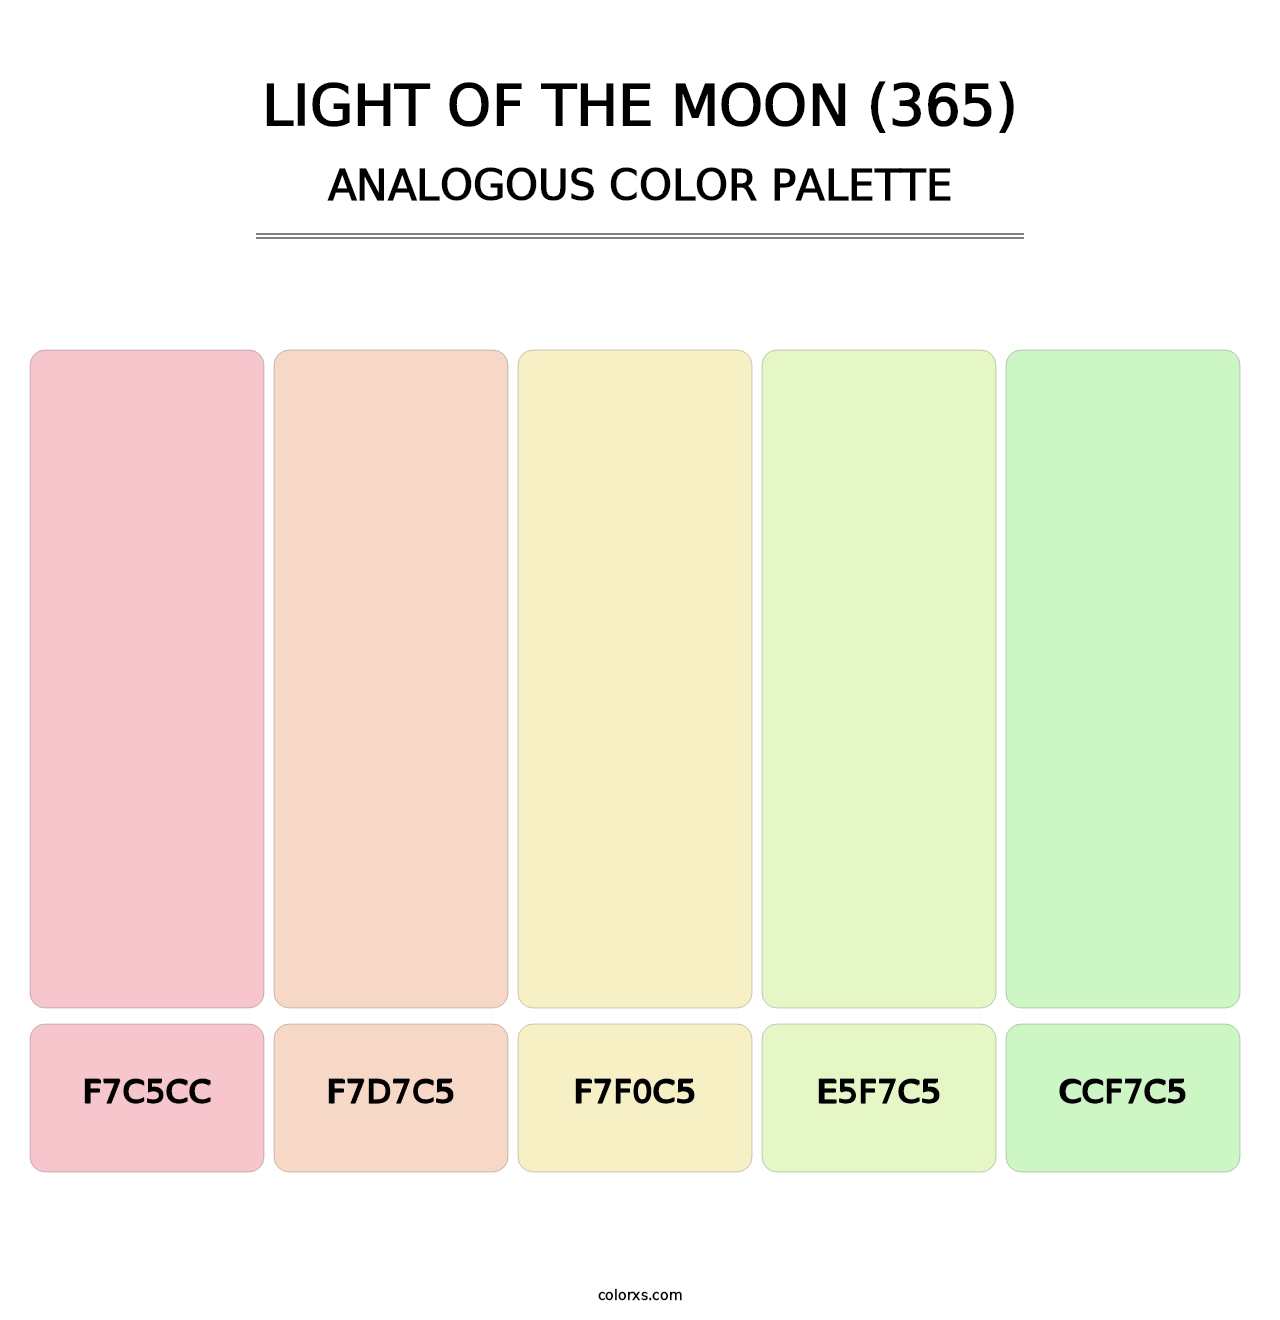 Light of the Moon (365) - Analogous Color Palette